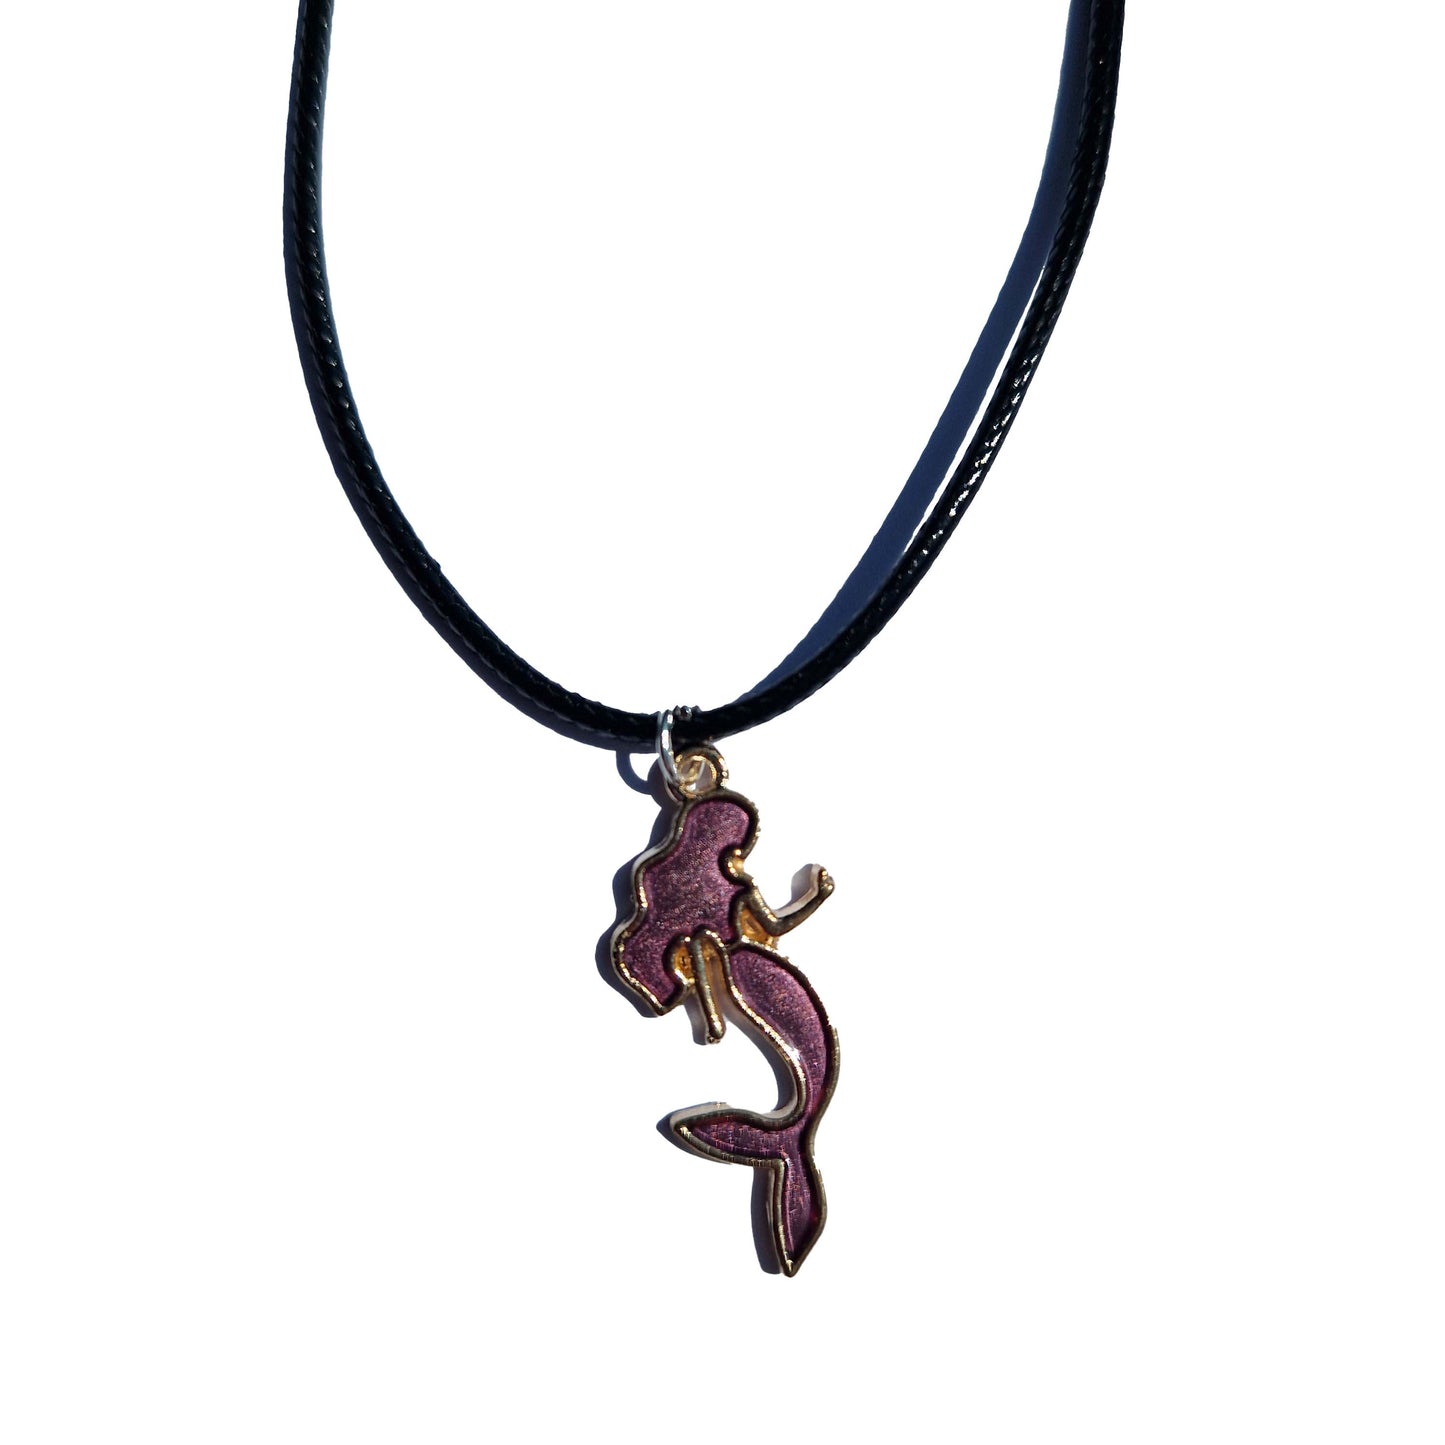 mermaid necklace uk cord necklace in purple